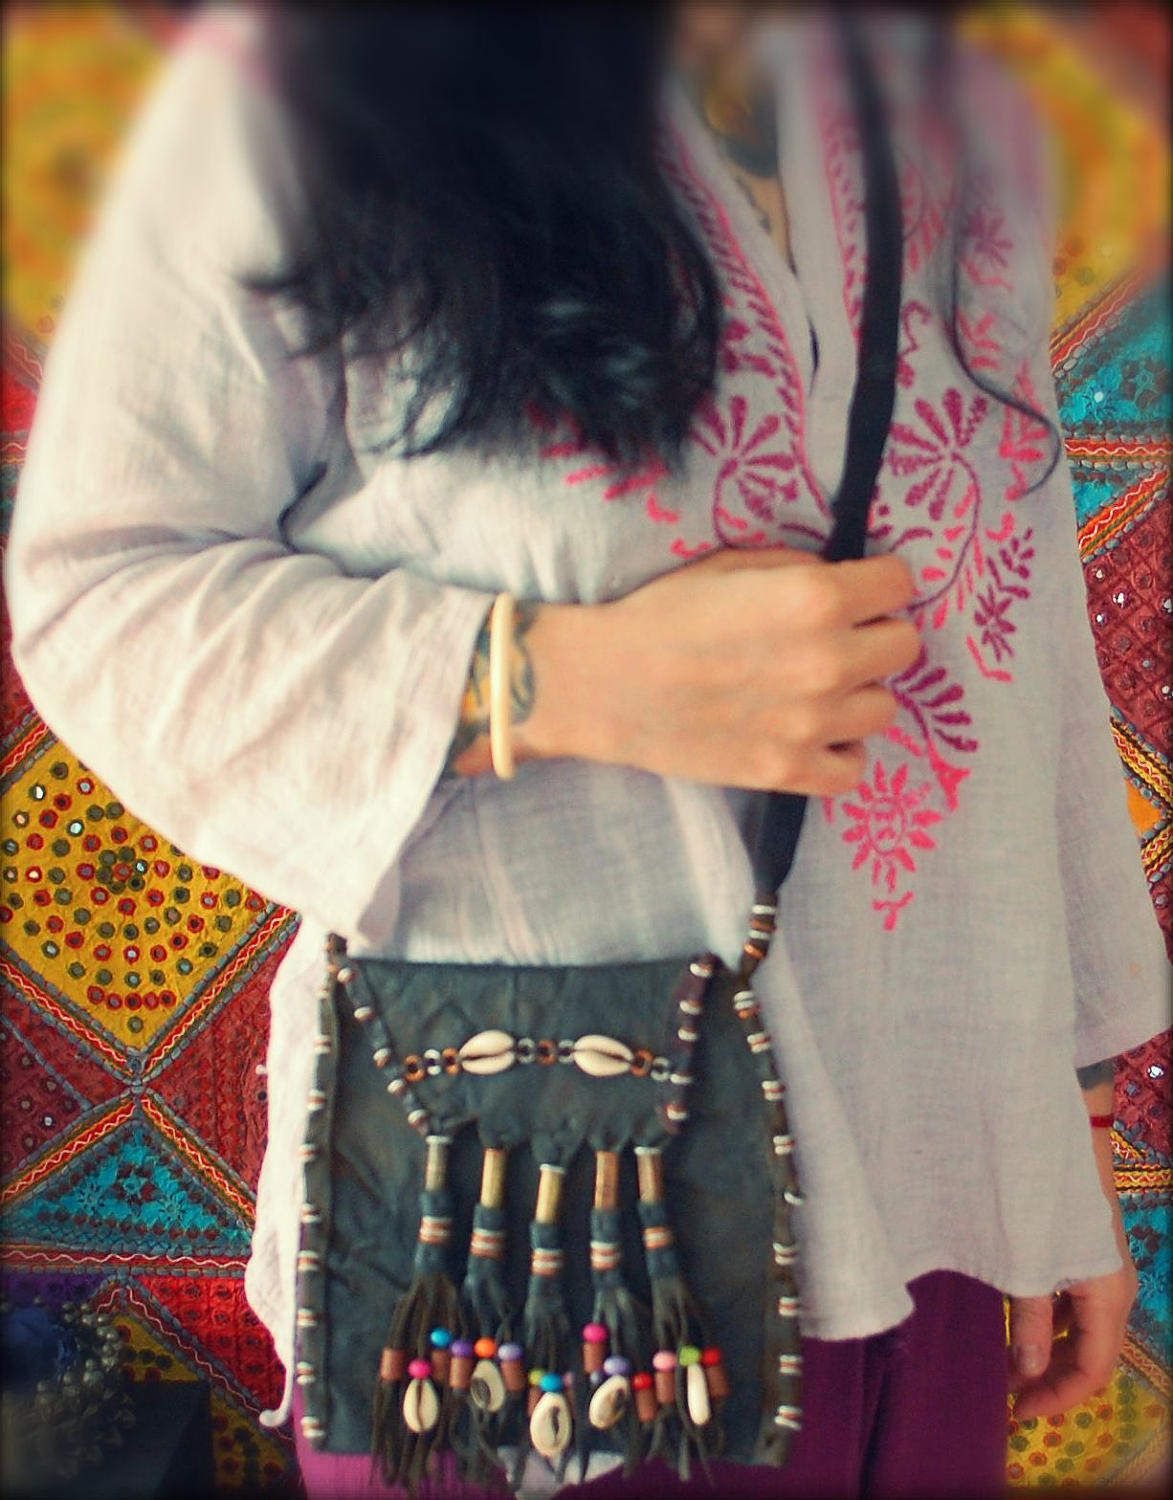 Wodaabe Leather Bag with Cowrie Shells - Fulani Leather Bag from Mali - Tribal Leather Bag - African Leather Pouch